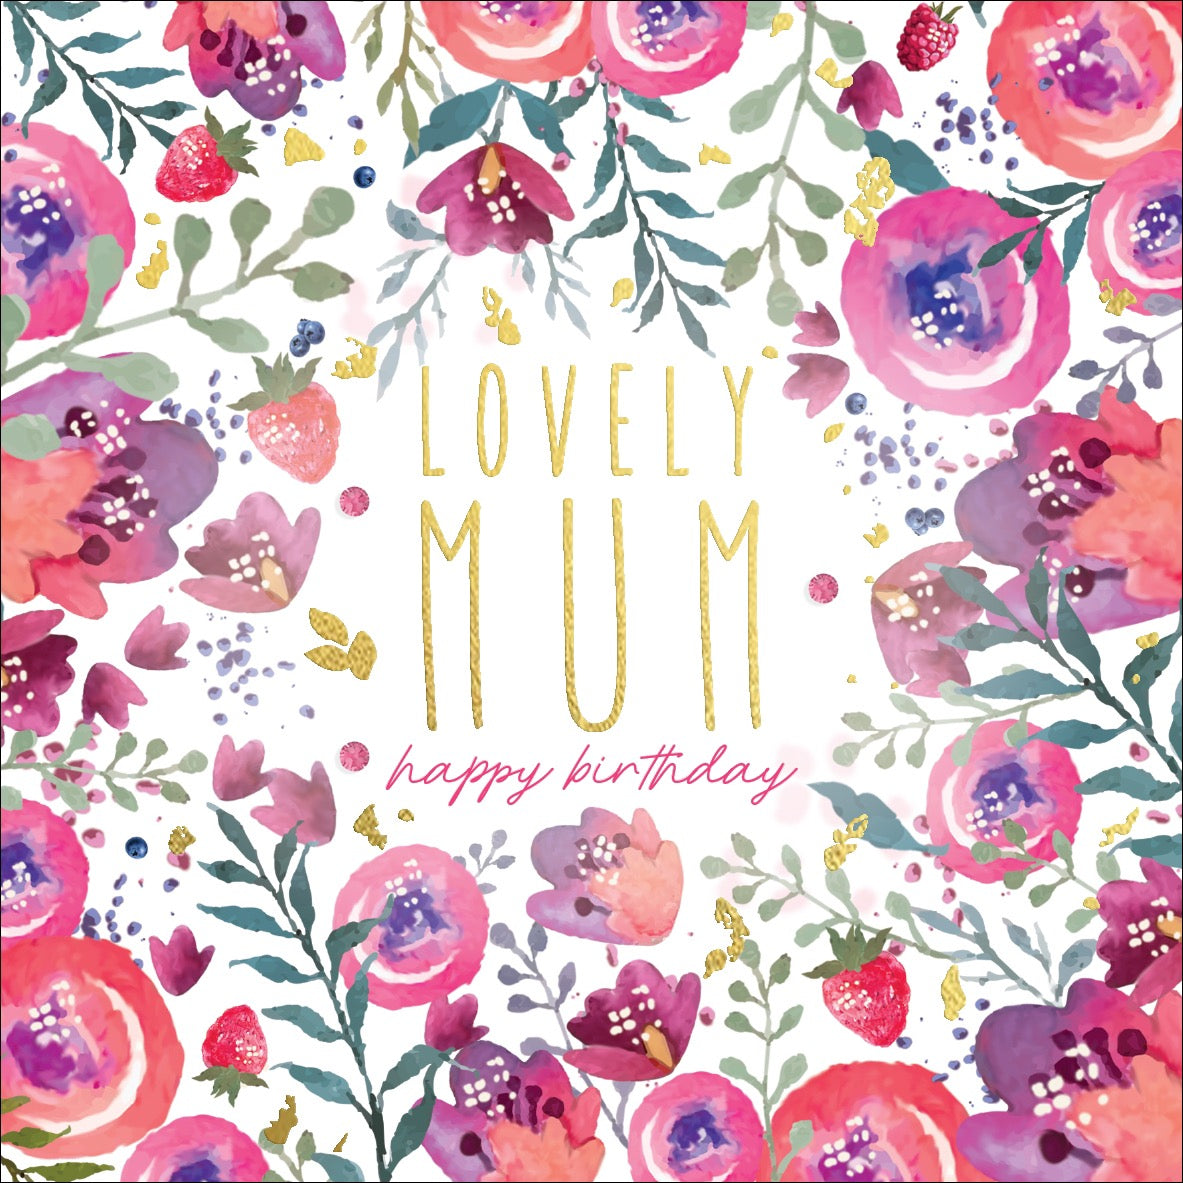 Lovely Mum Happy Birthday Pink Floral Card